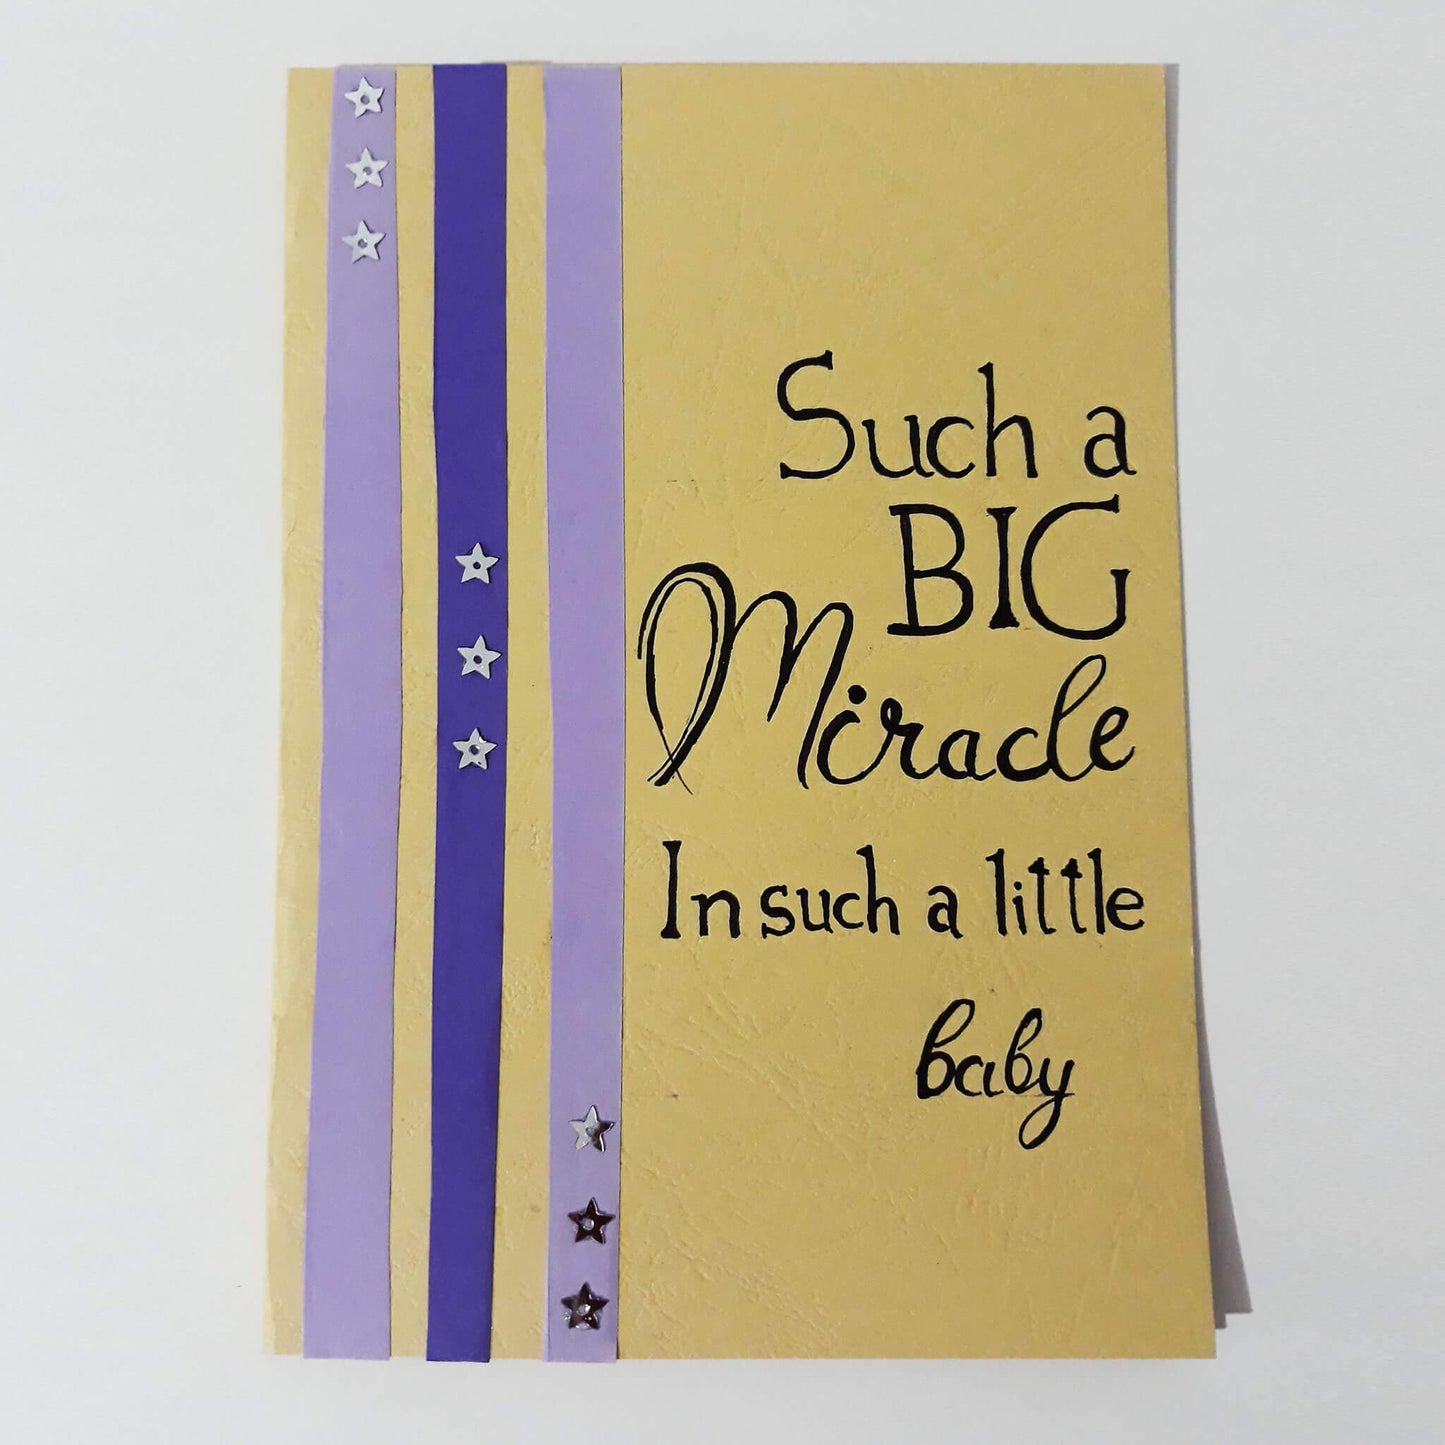 Such a Miracle - Handmade Card Collection - BabySpace Shop